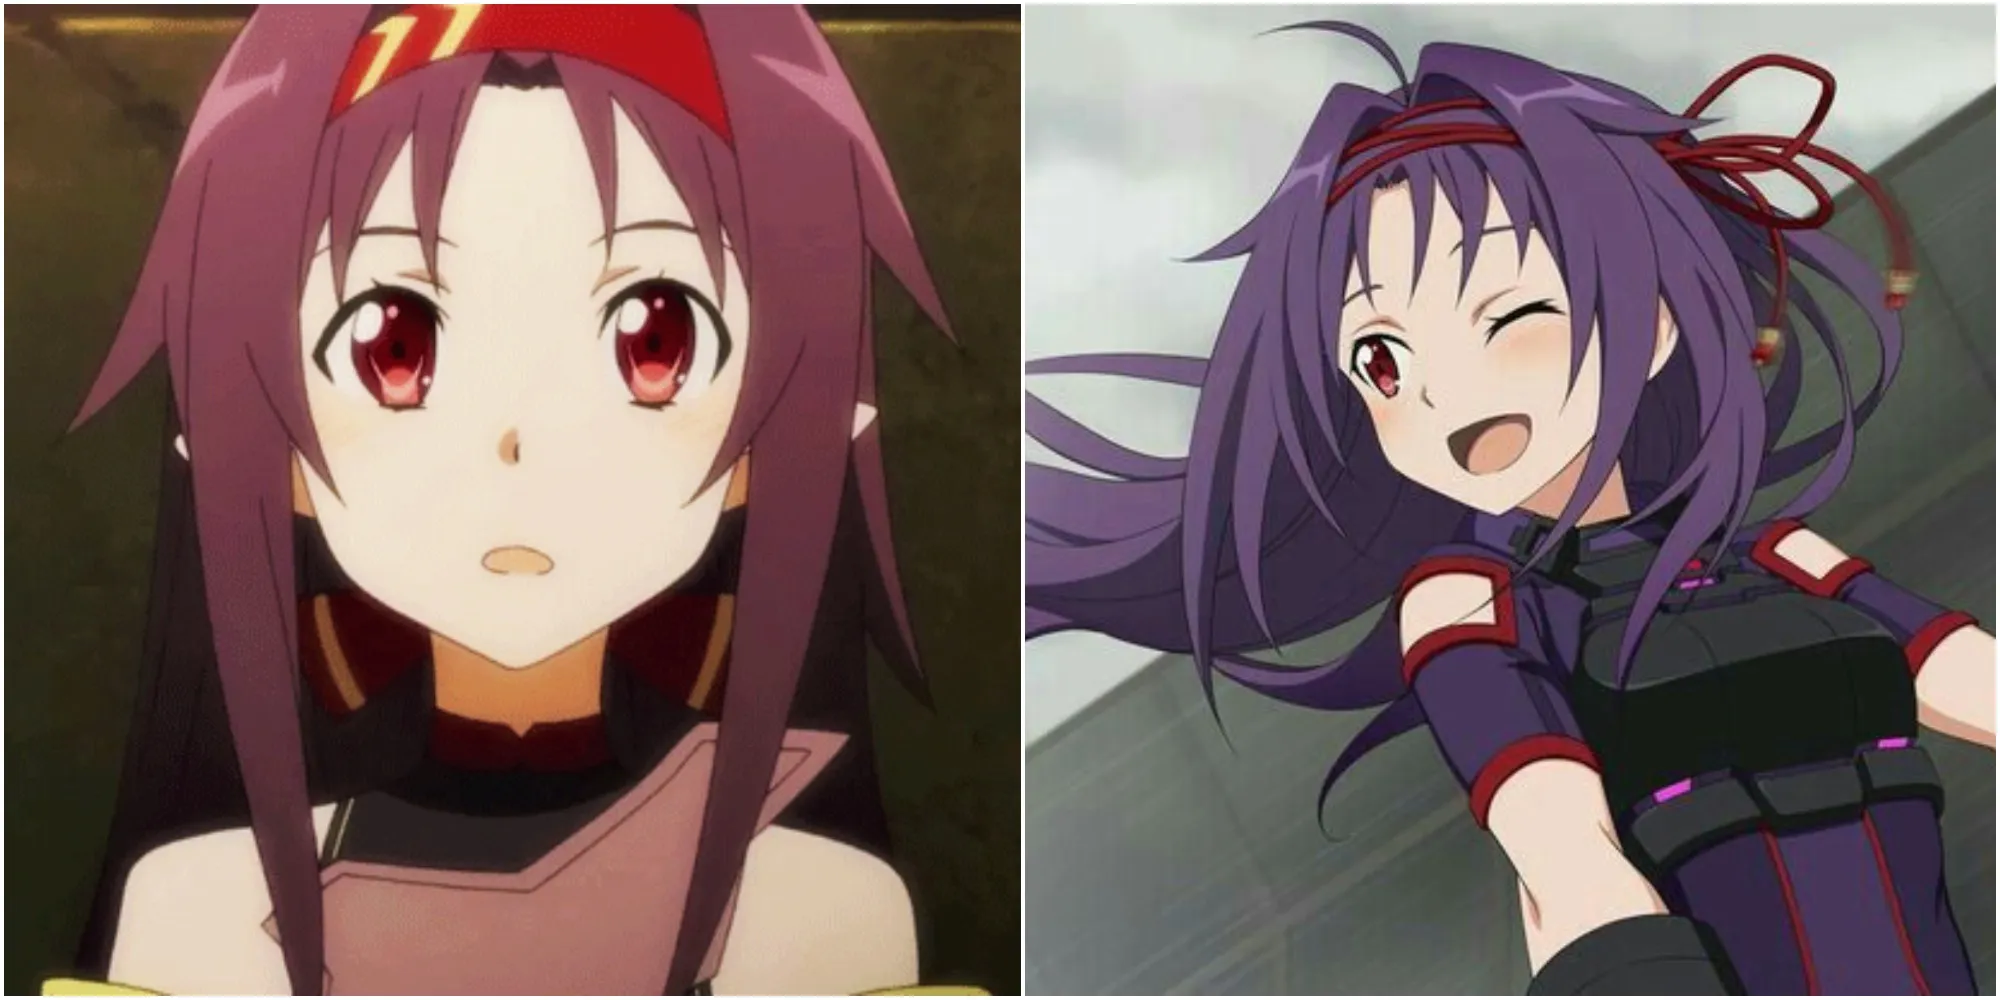 Collage Of Konno Yuuki From Sword Art Online